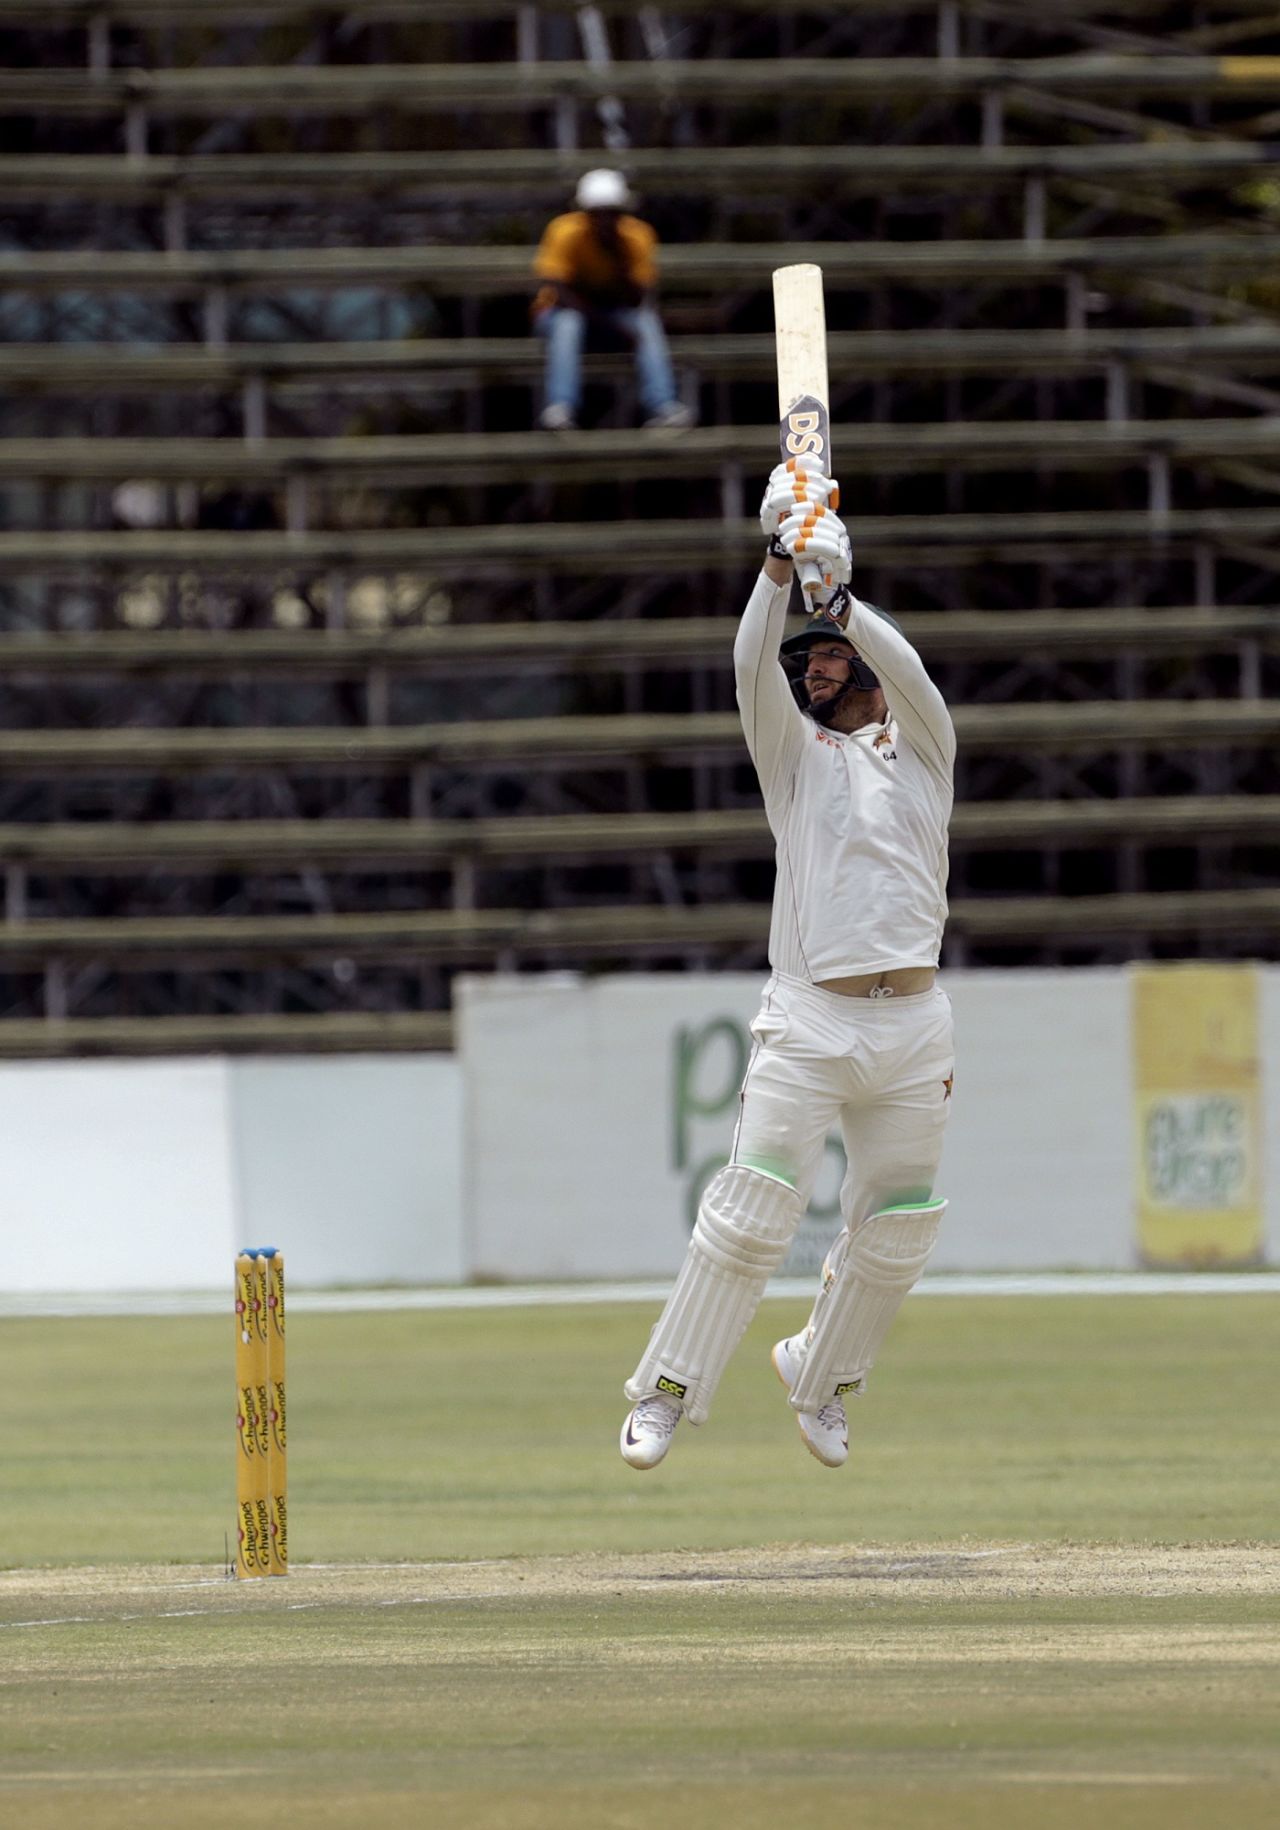 Brendan Taylor goes airborne to connect a ramp shot, Zimbabwe v Sri Lanka, 2nd Test, Harare, 4th day, January 30, 2020